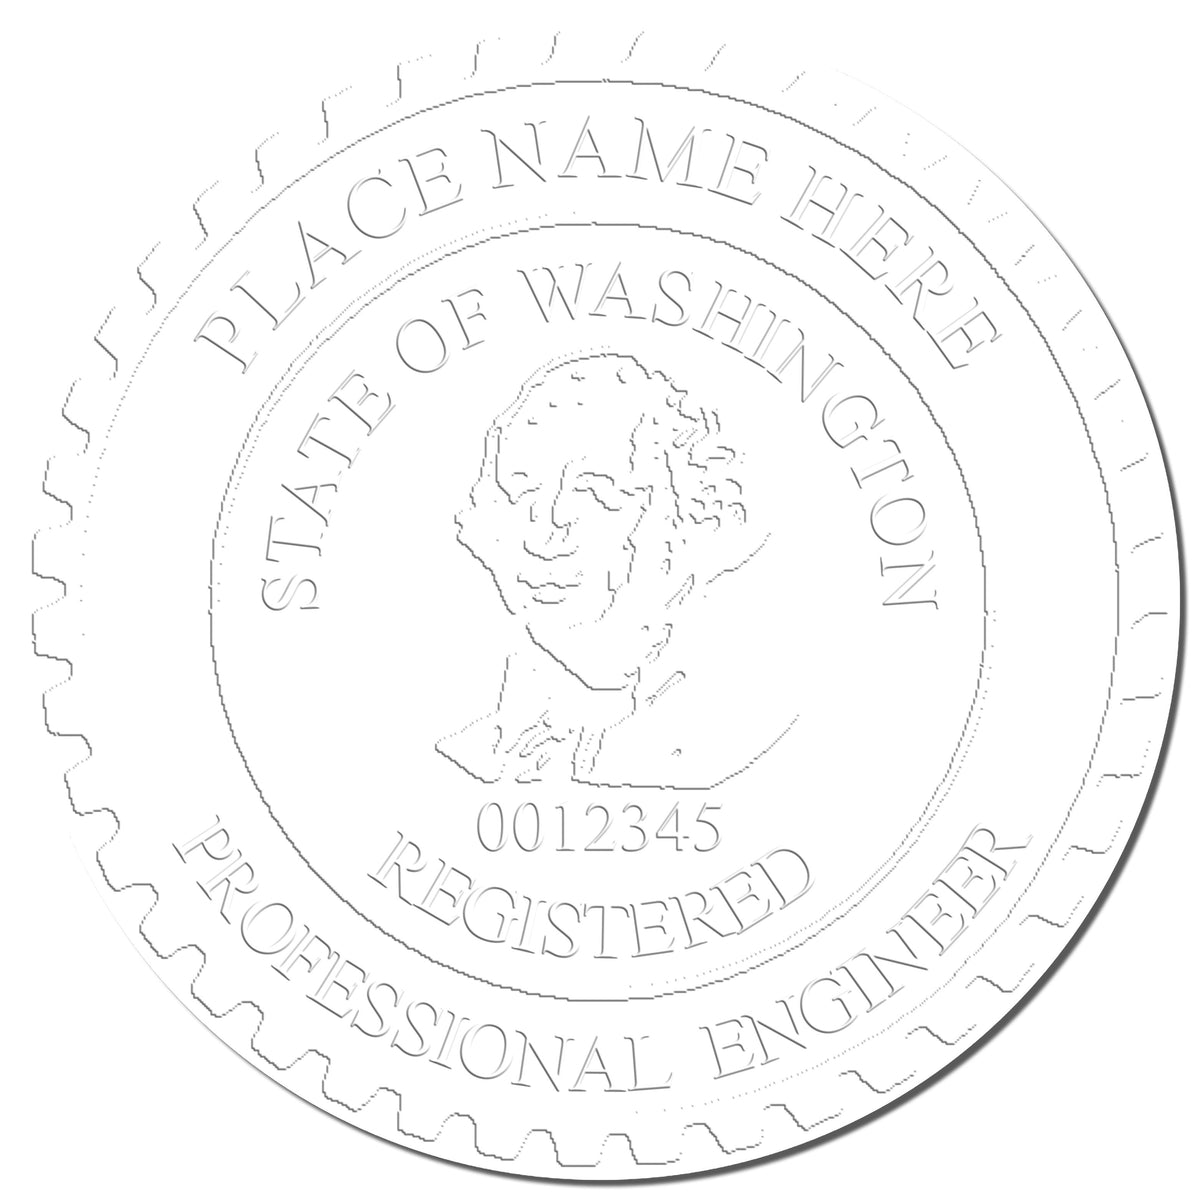 This paper is stamped with a sample imprint of the State of Washington Extended Long Reach Engineer Seal, signifying its quality and reliability.